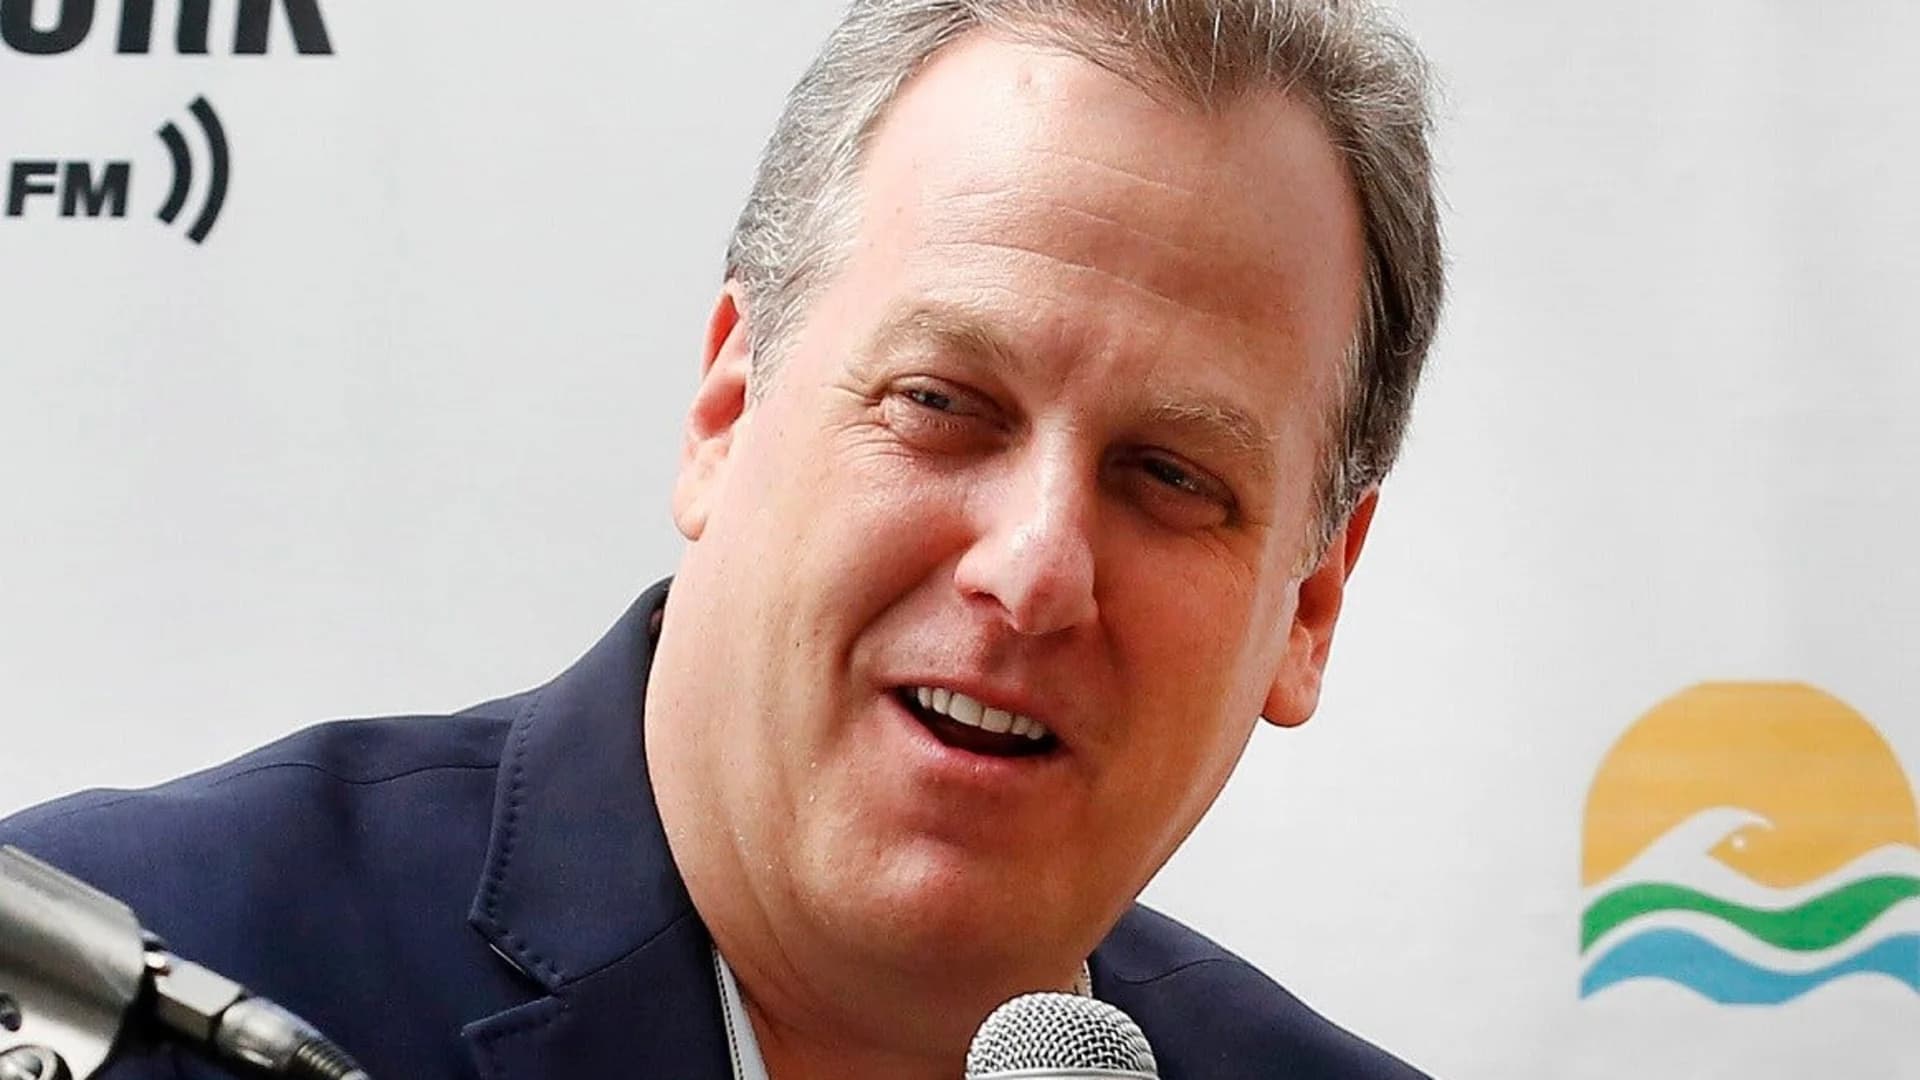 Yankees broadcaster Michael Kay to have vocal cord surgery